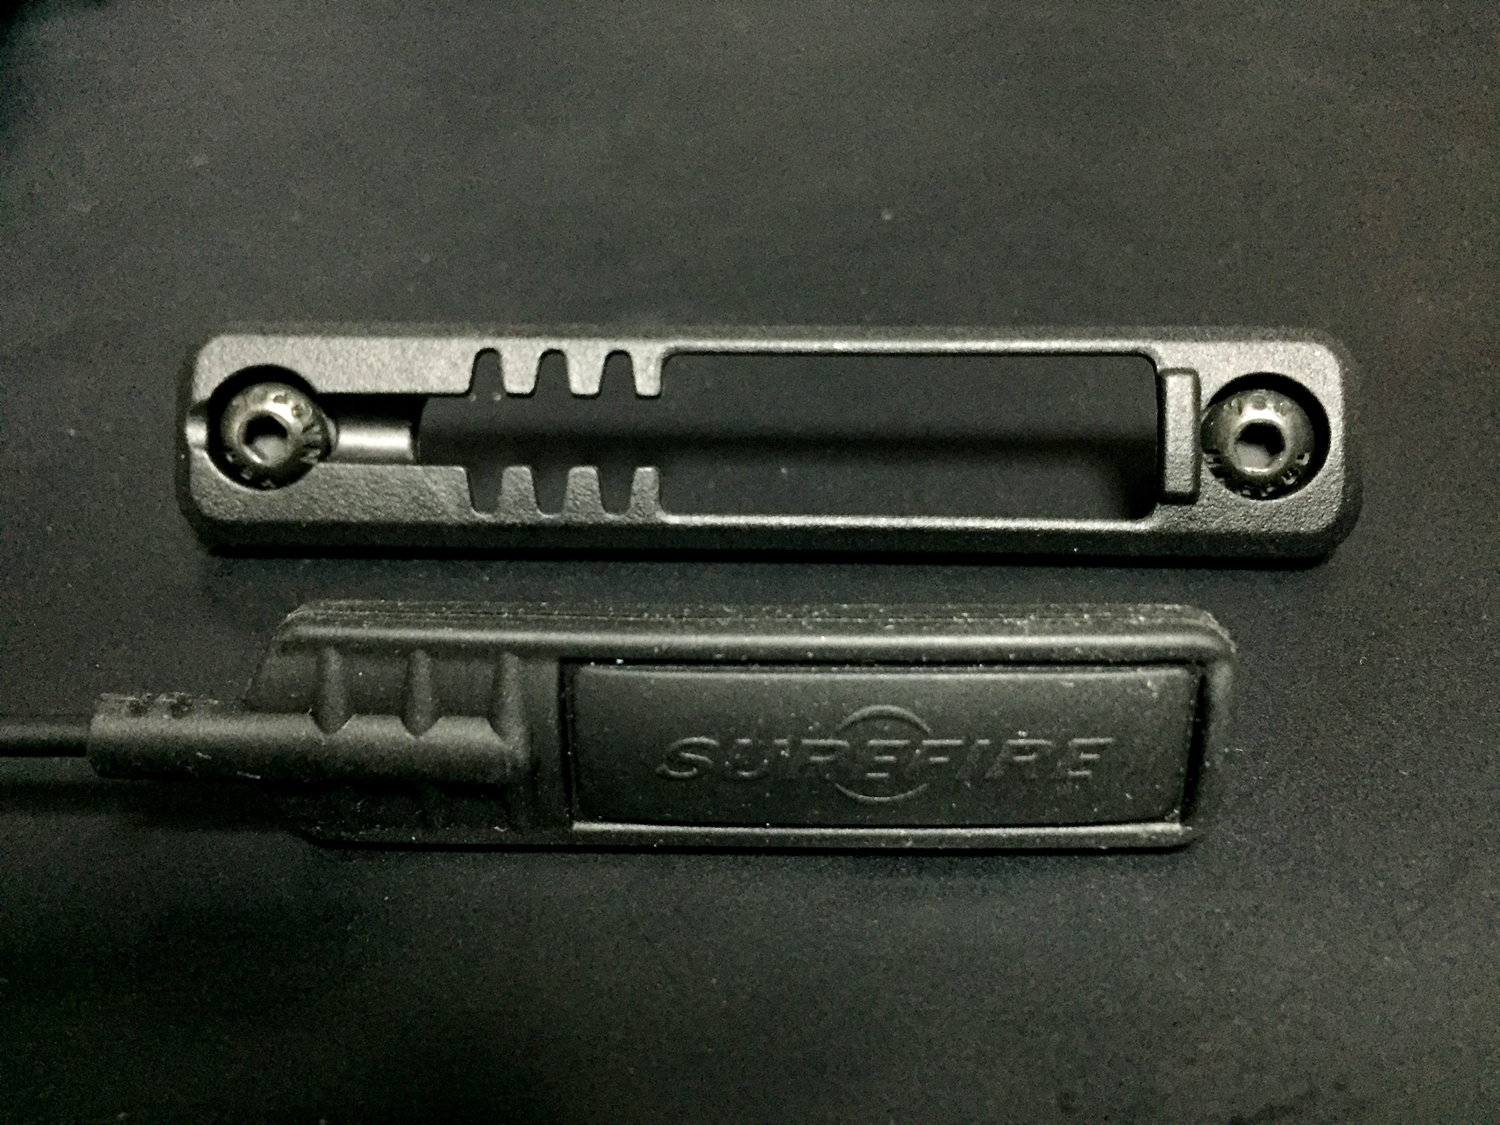 10 M-LOK MAGPUL Tape Switch Mounting Plate for Surefire ST Polymer MADE IN USA マグプル 実物 本家 テープ リモート スイッチ